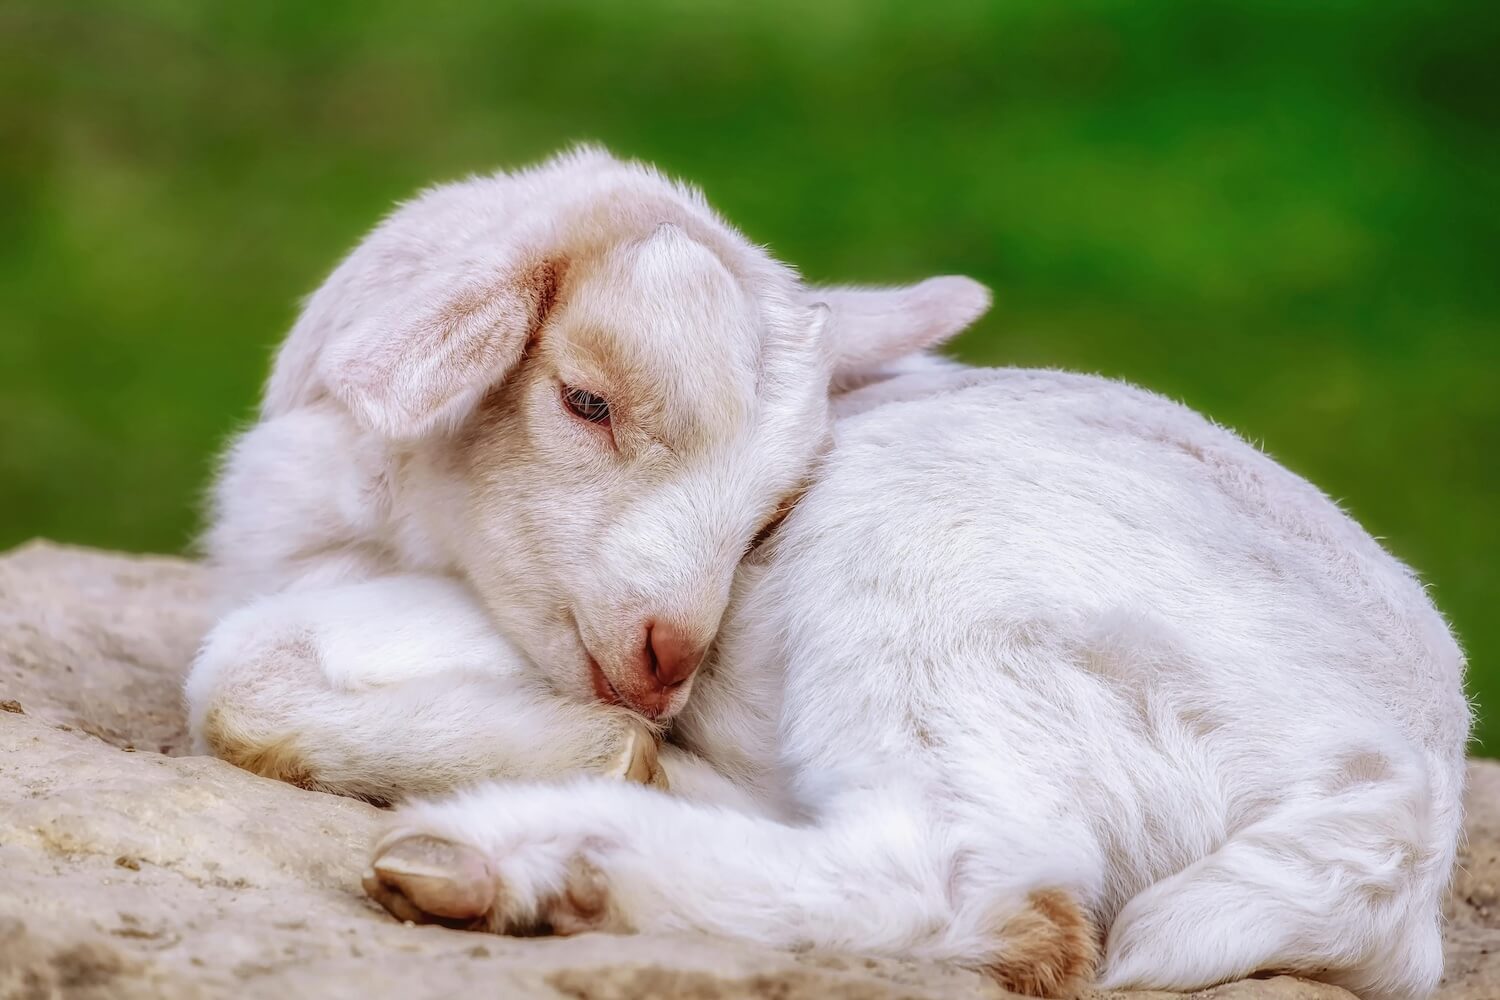 Image of a cute baby goat